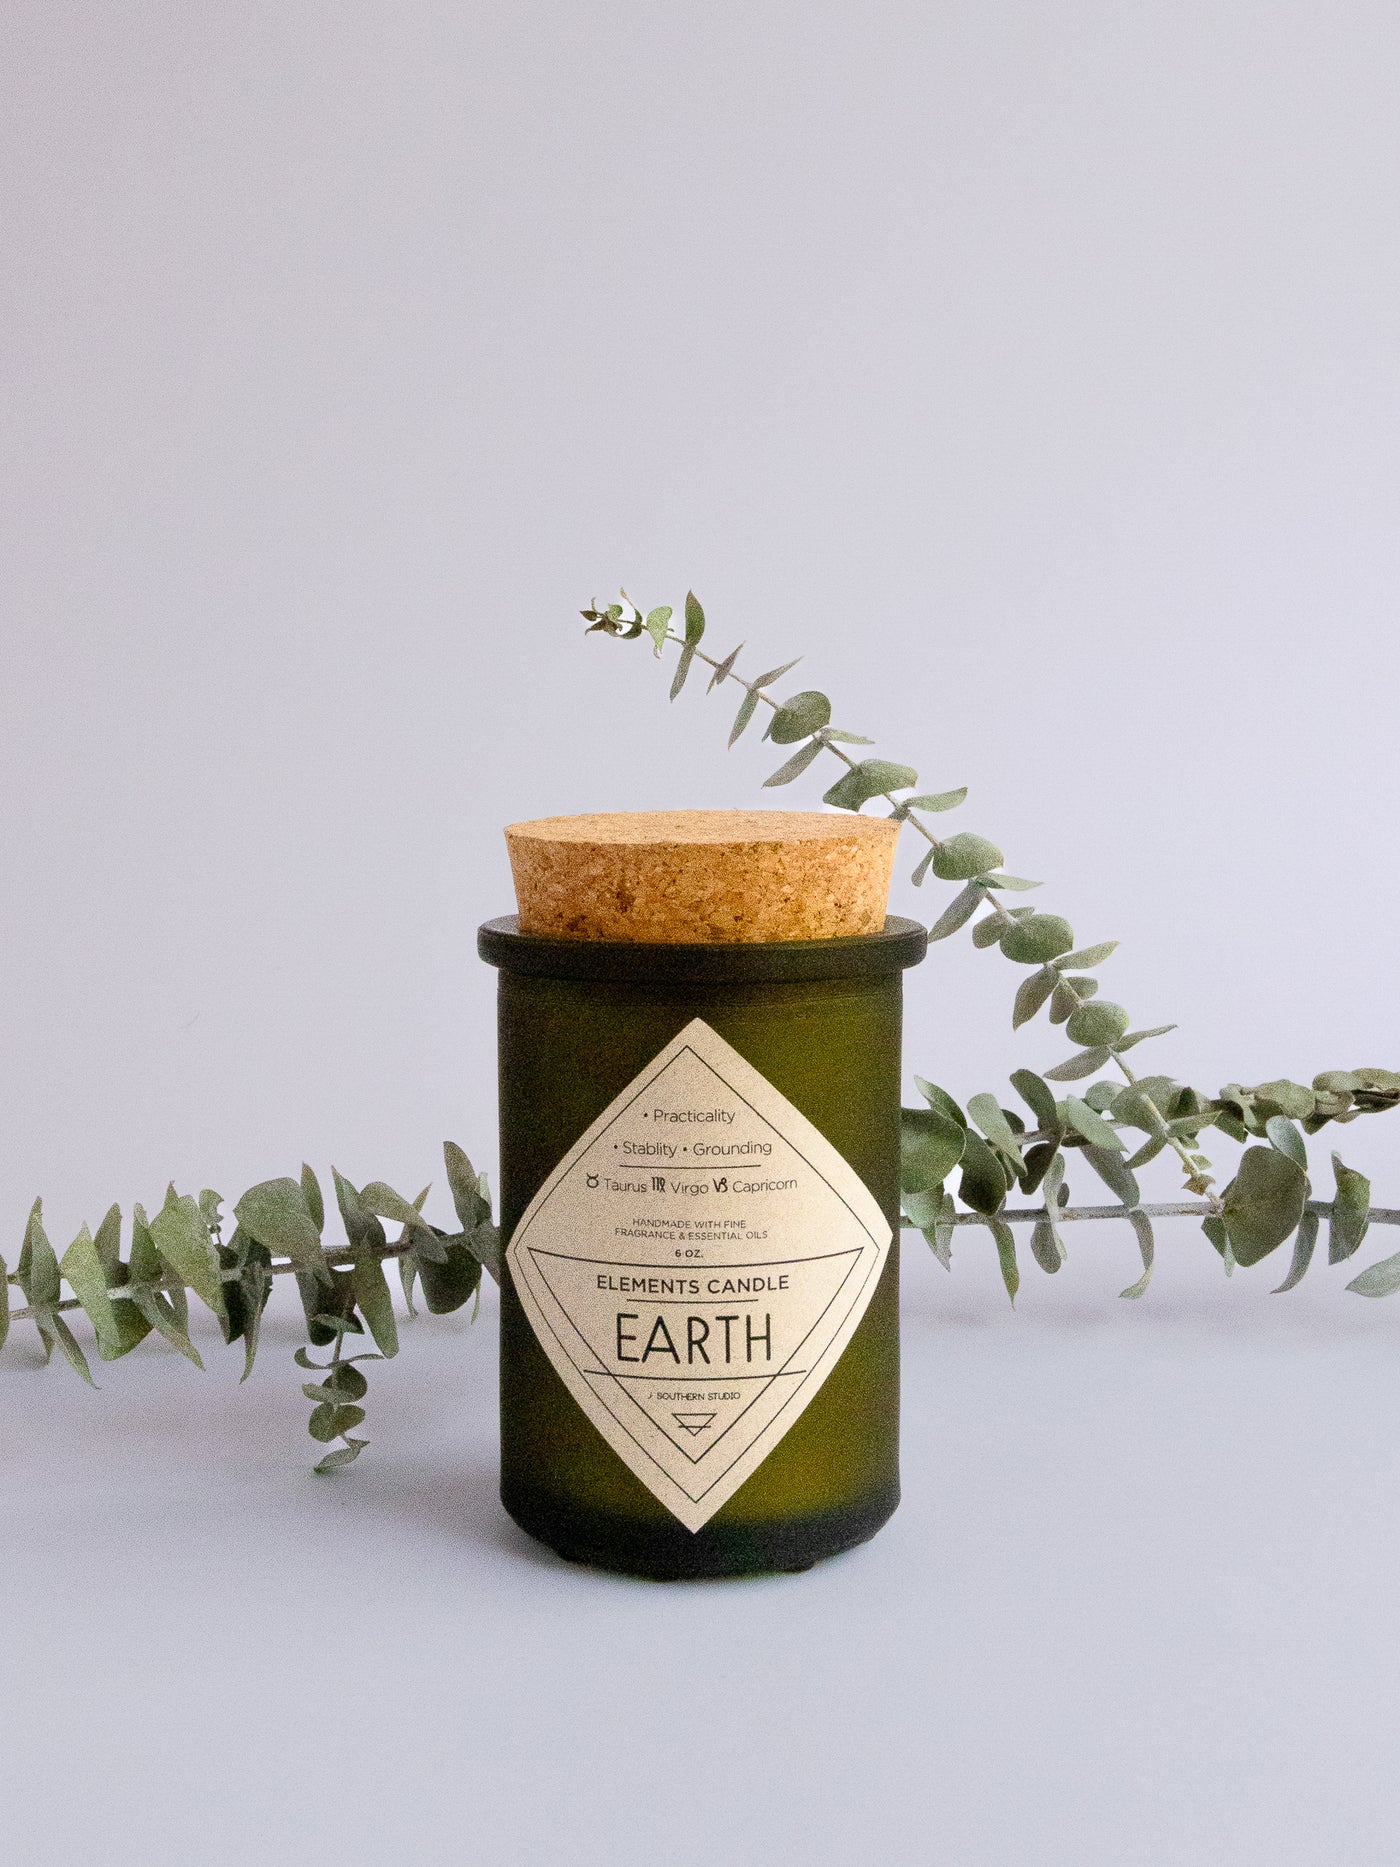 EARTH ELEMENT CANDLE WITH PATCHOULI AND HONYSUCKLE